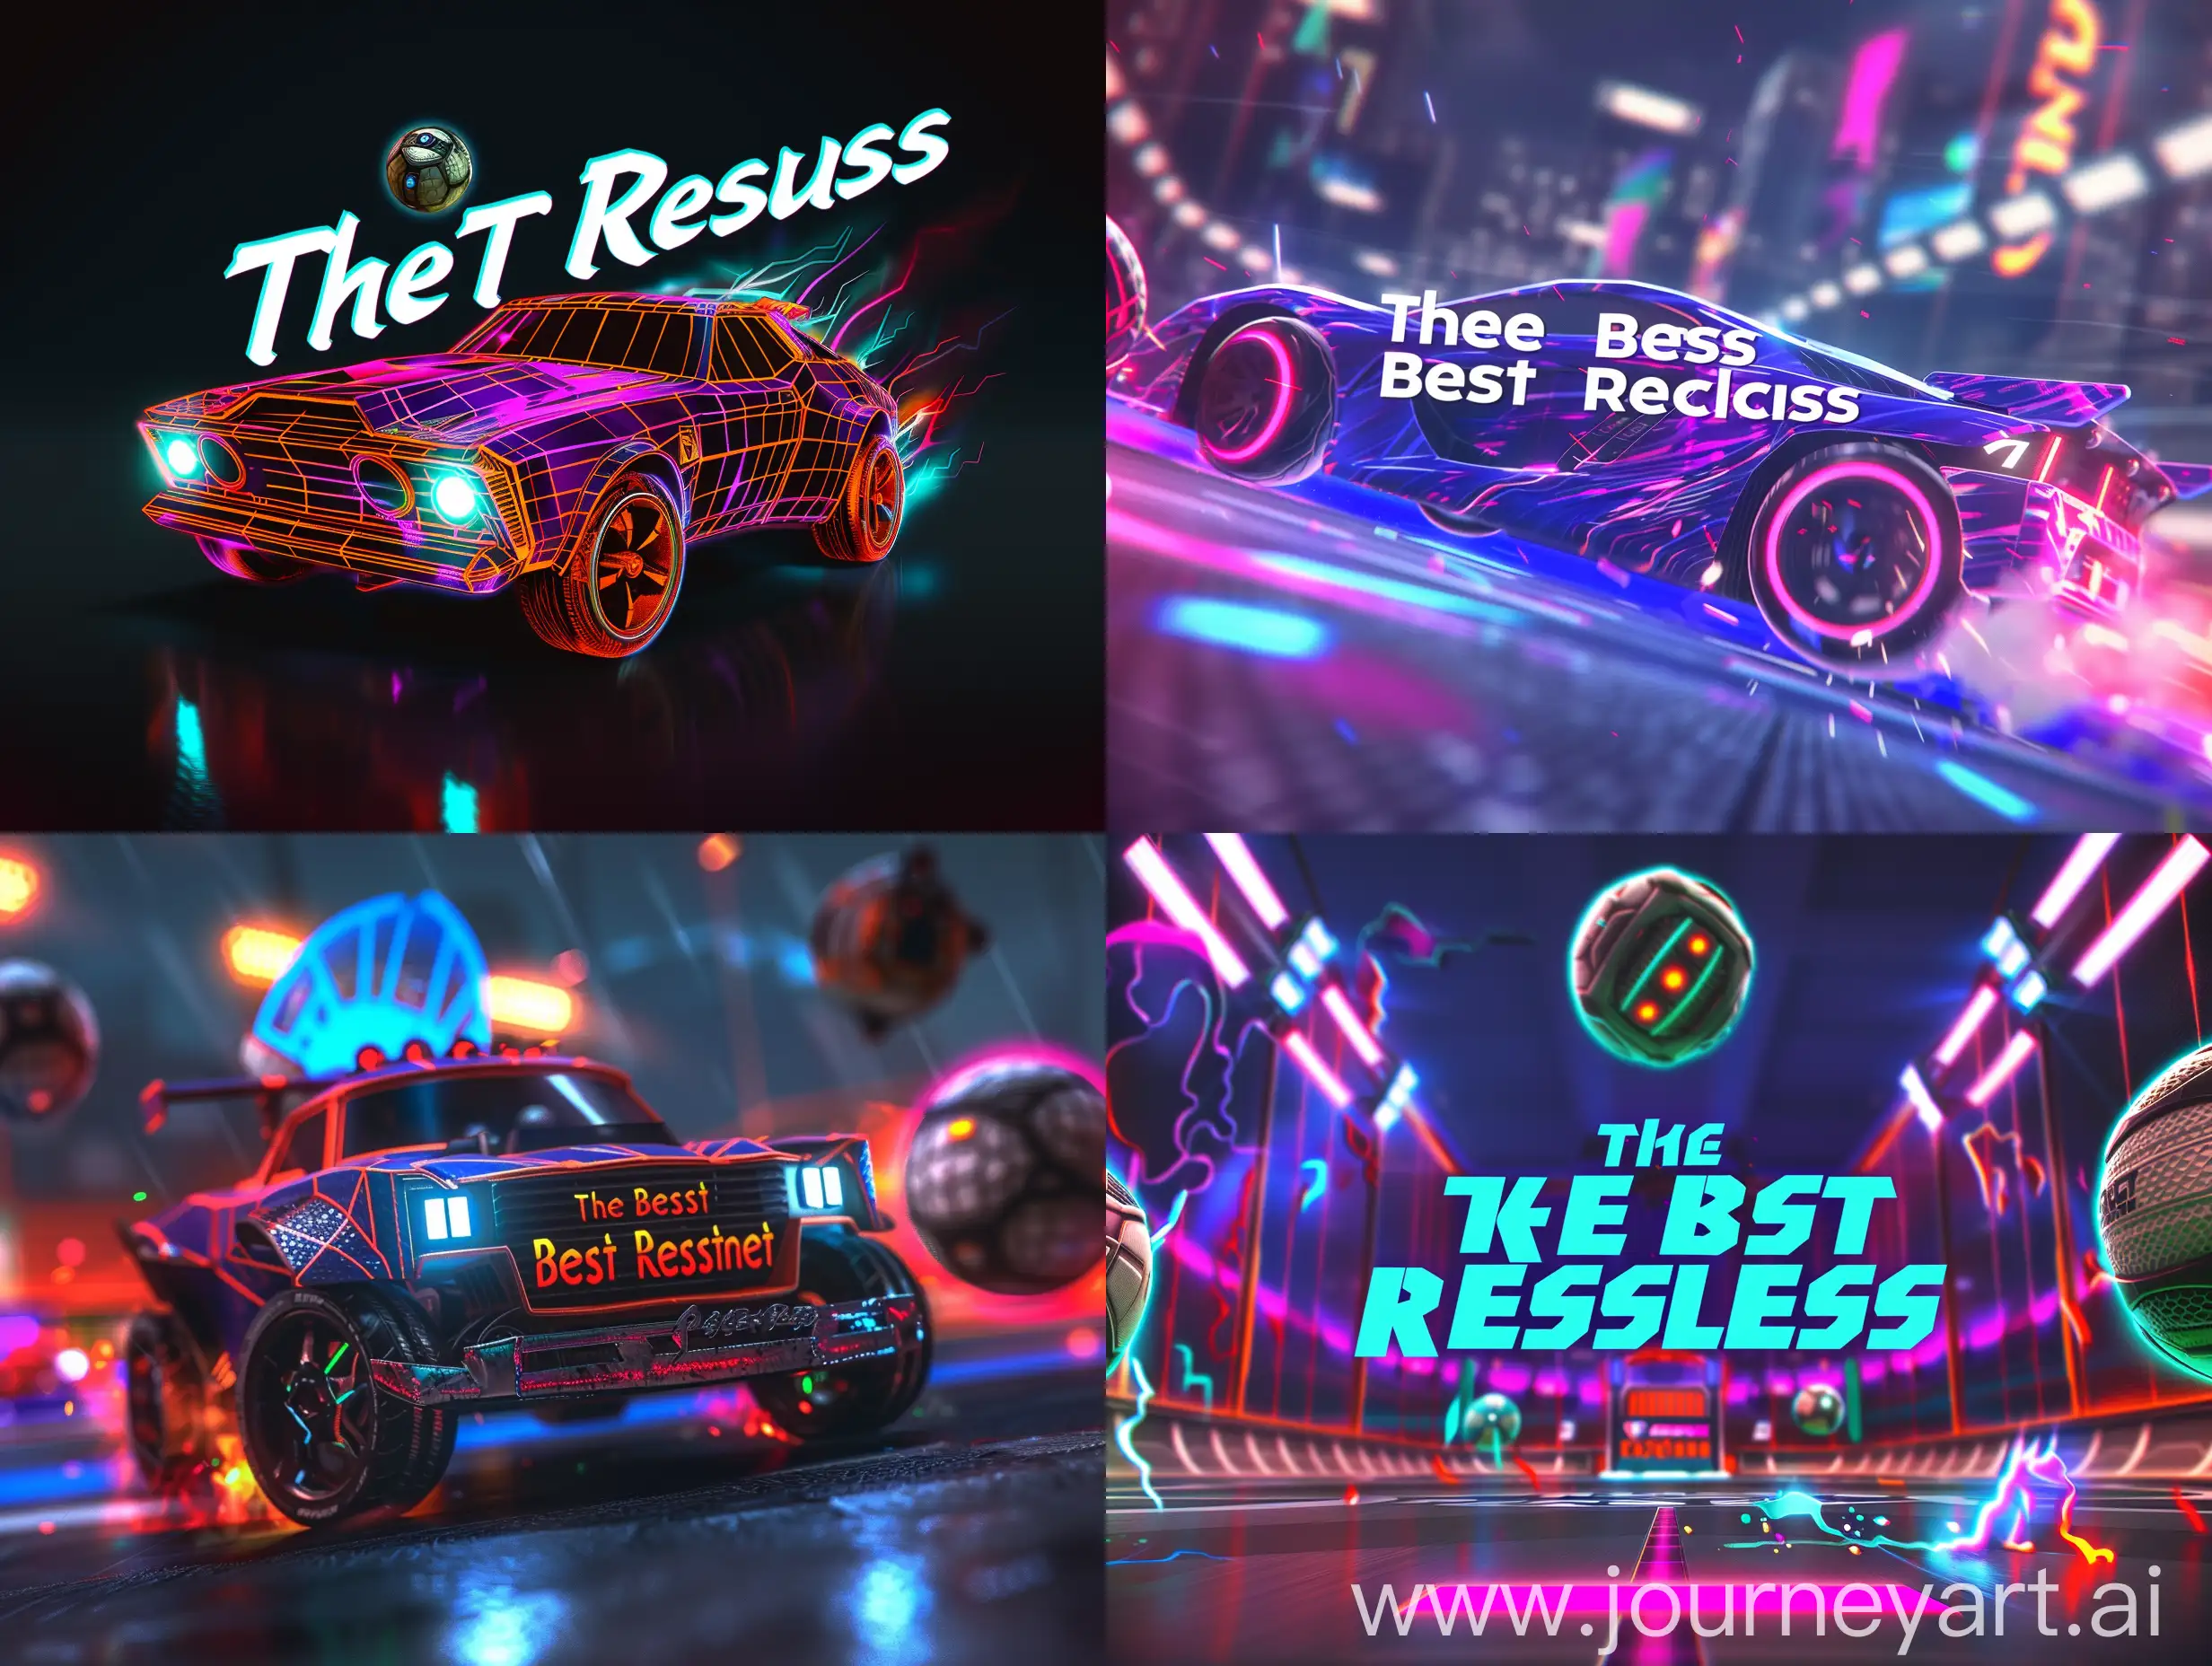 Make a banner for the event on the discord server for the Rocket League game. The event is called: the best replays. Imagine that the banner is made using 3D graphics, using shadows, glow, and the like. Choose the colors at your discretion. Also, do not forget to add the inscription: "the best replays".